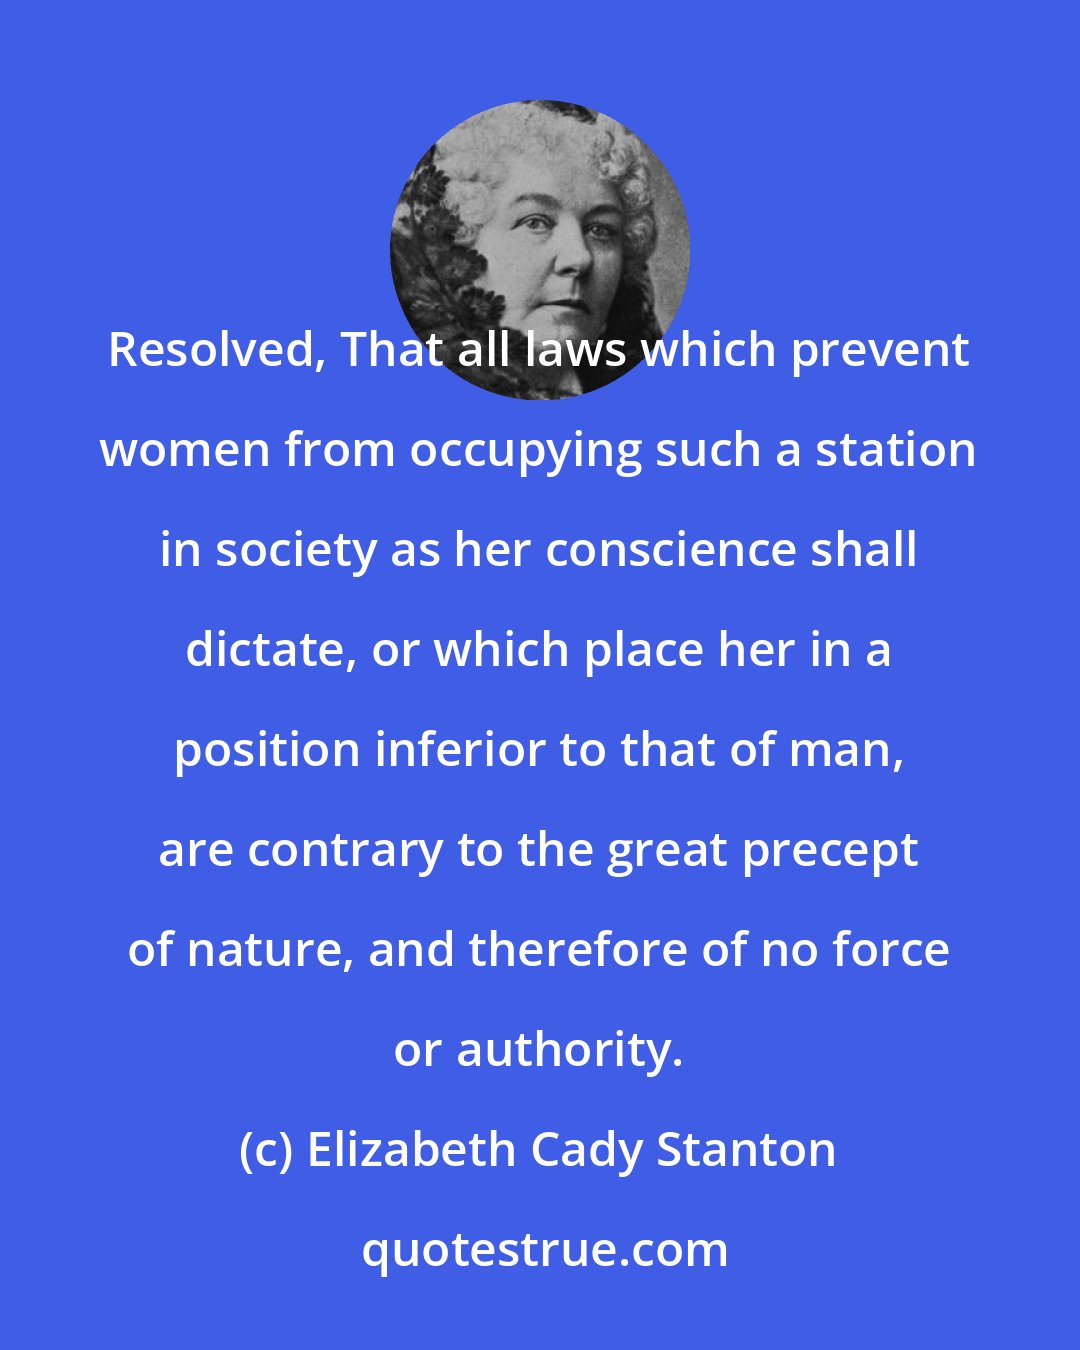 Elizabeth Cady Stanton: Resolved, That all laws which prevent women from occupying such a station in society as her conscience shall dictate, or which place her in a position inferior to that of man, are contrary to the great precept of nature, and therefore of no force or authority.